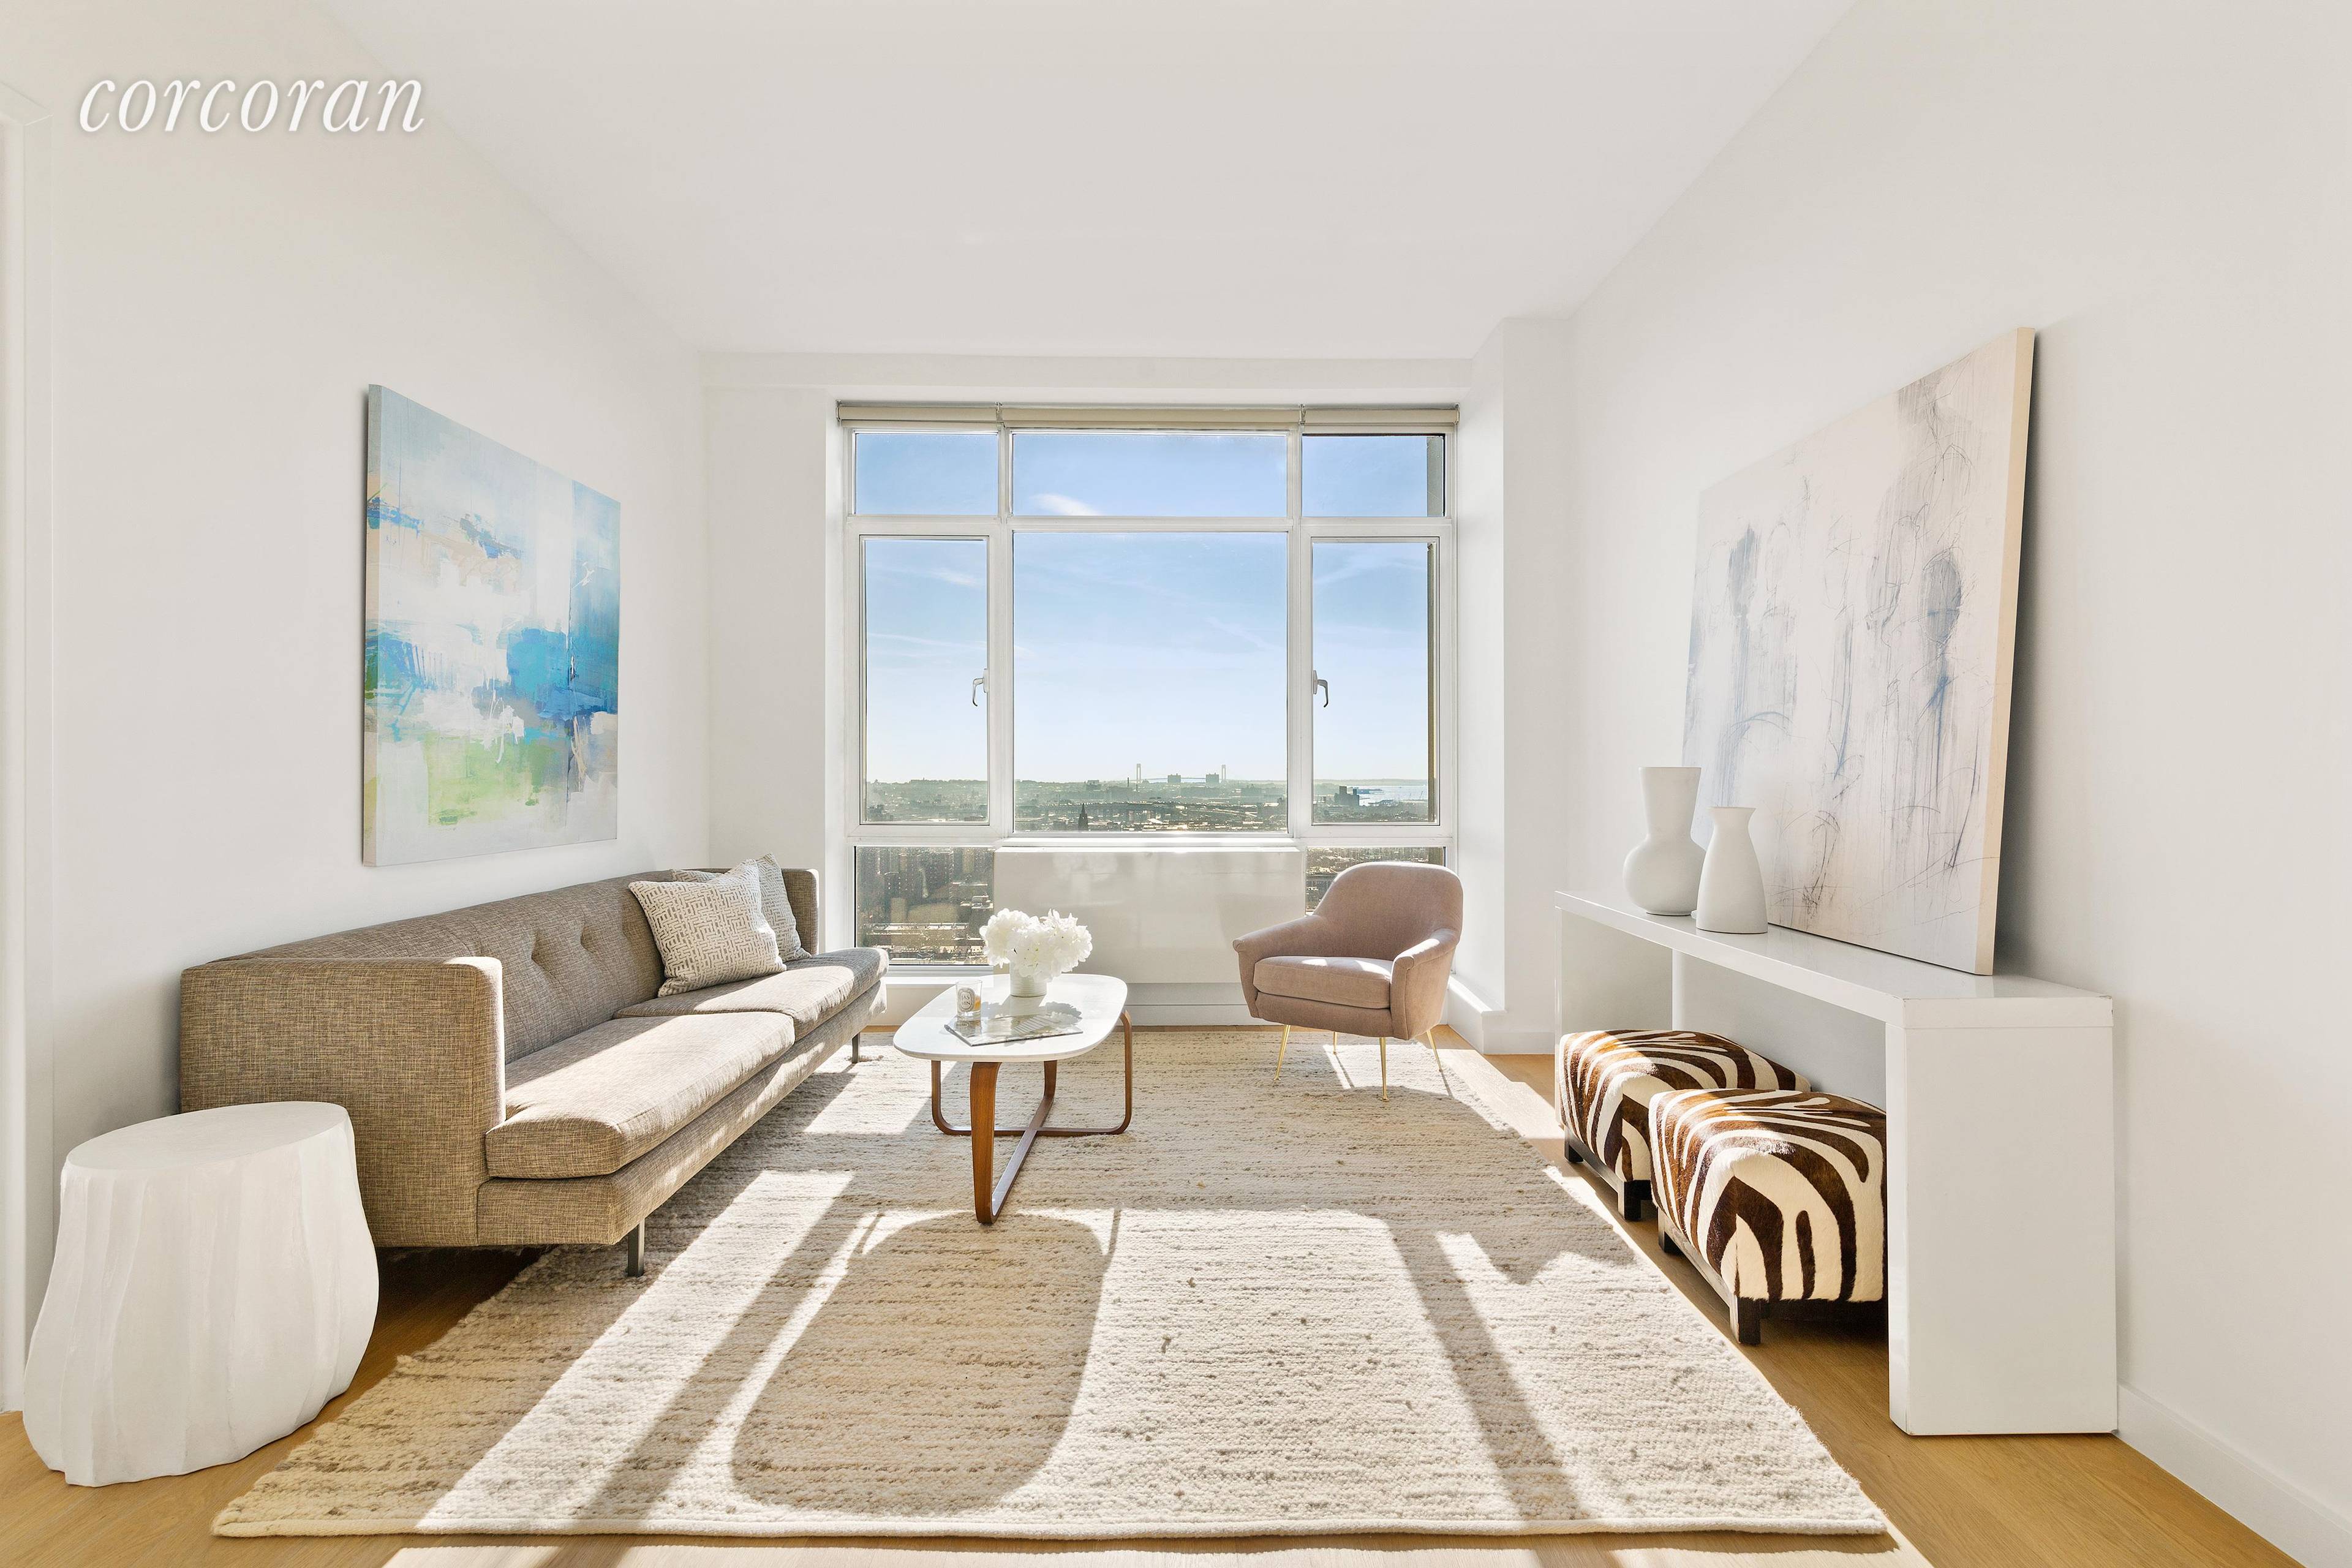 The view, light, and sky are breathtaking in this coveted 1 bedroom residence located in the heart of downtown Brooklyn and bordering on neighborhoods with fantastic amaneities Boerum Hill, Brooklyn ...